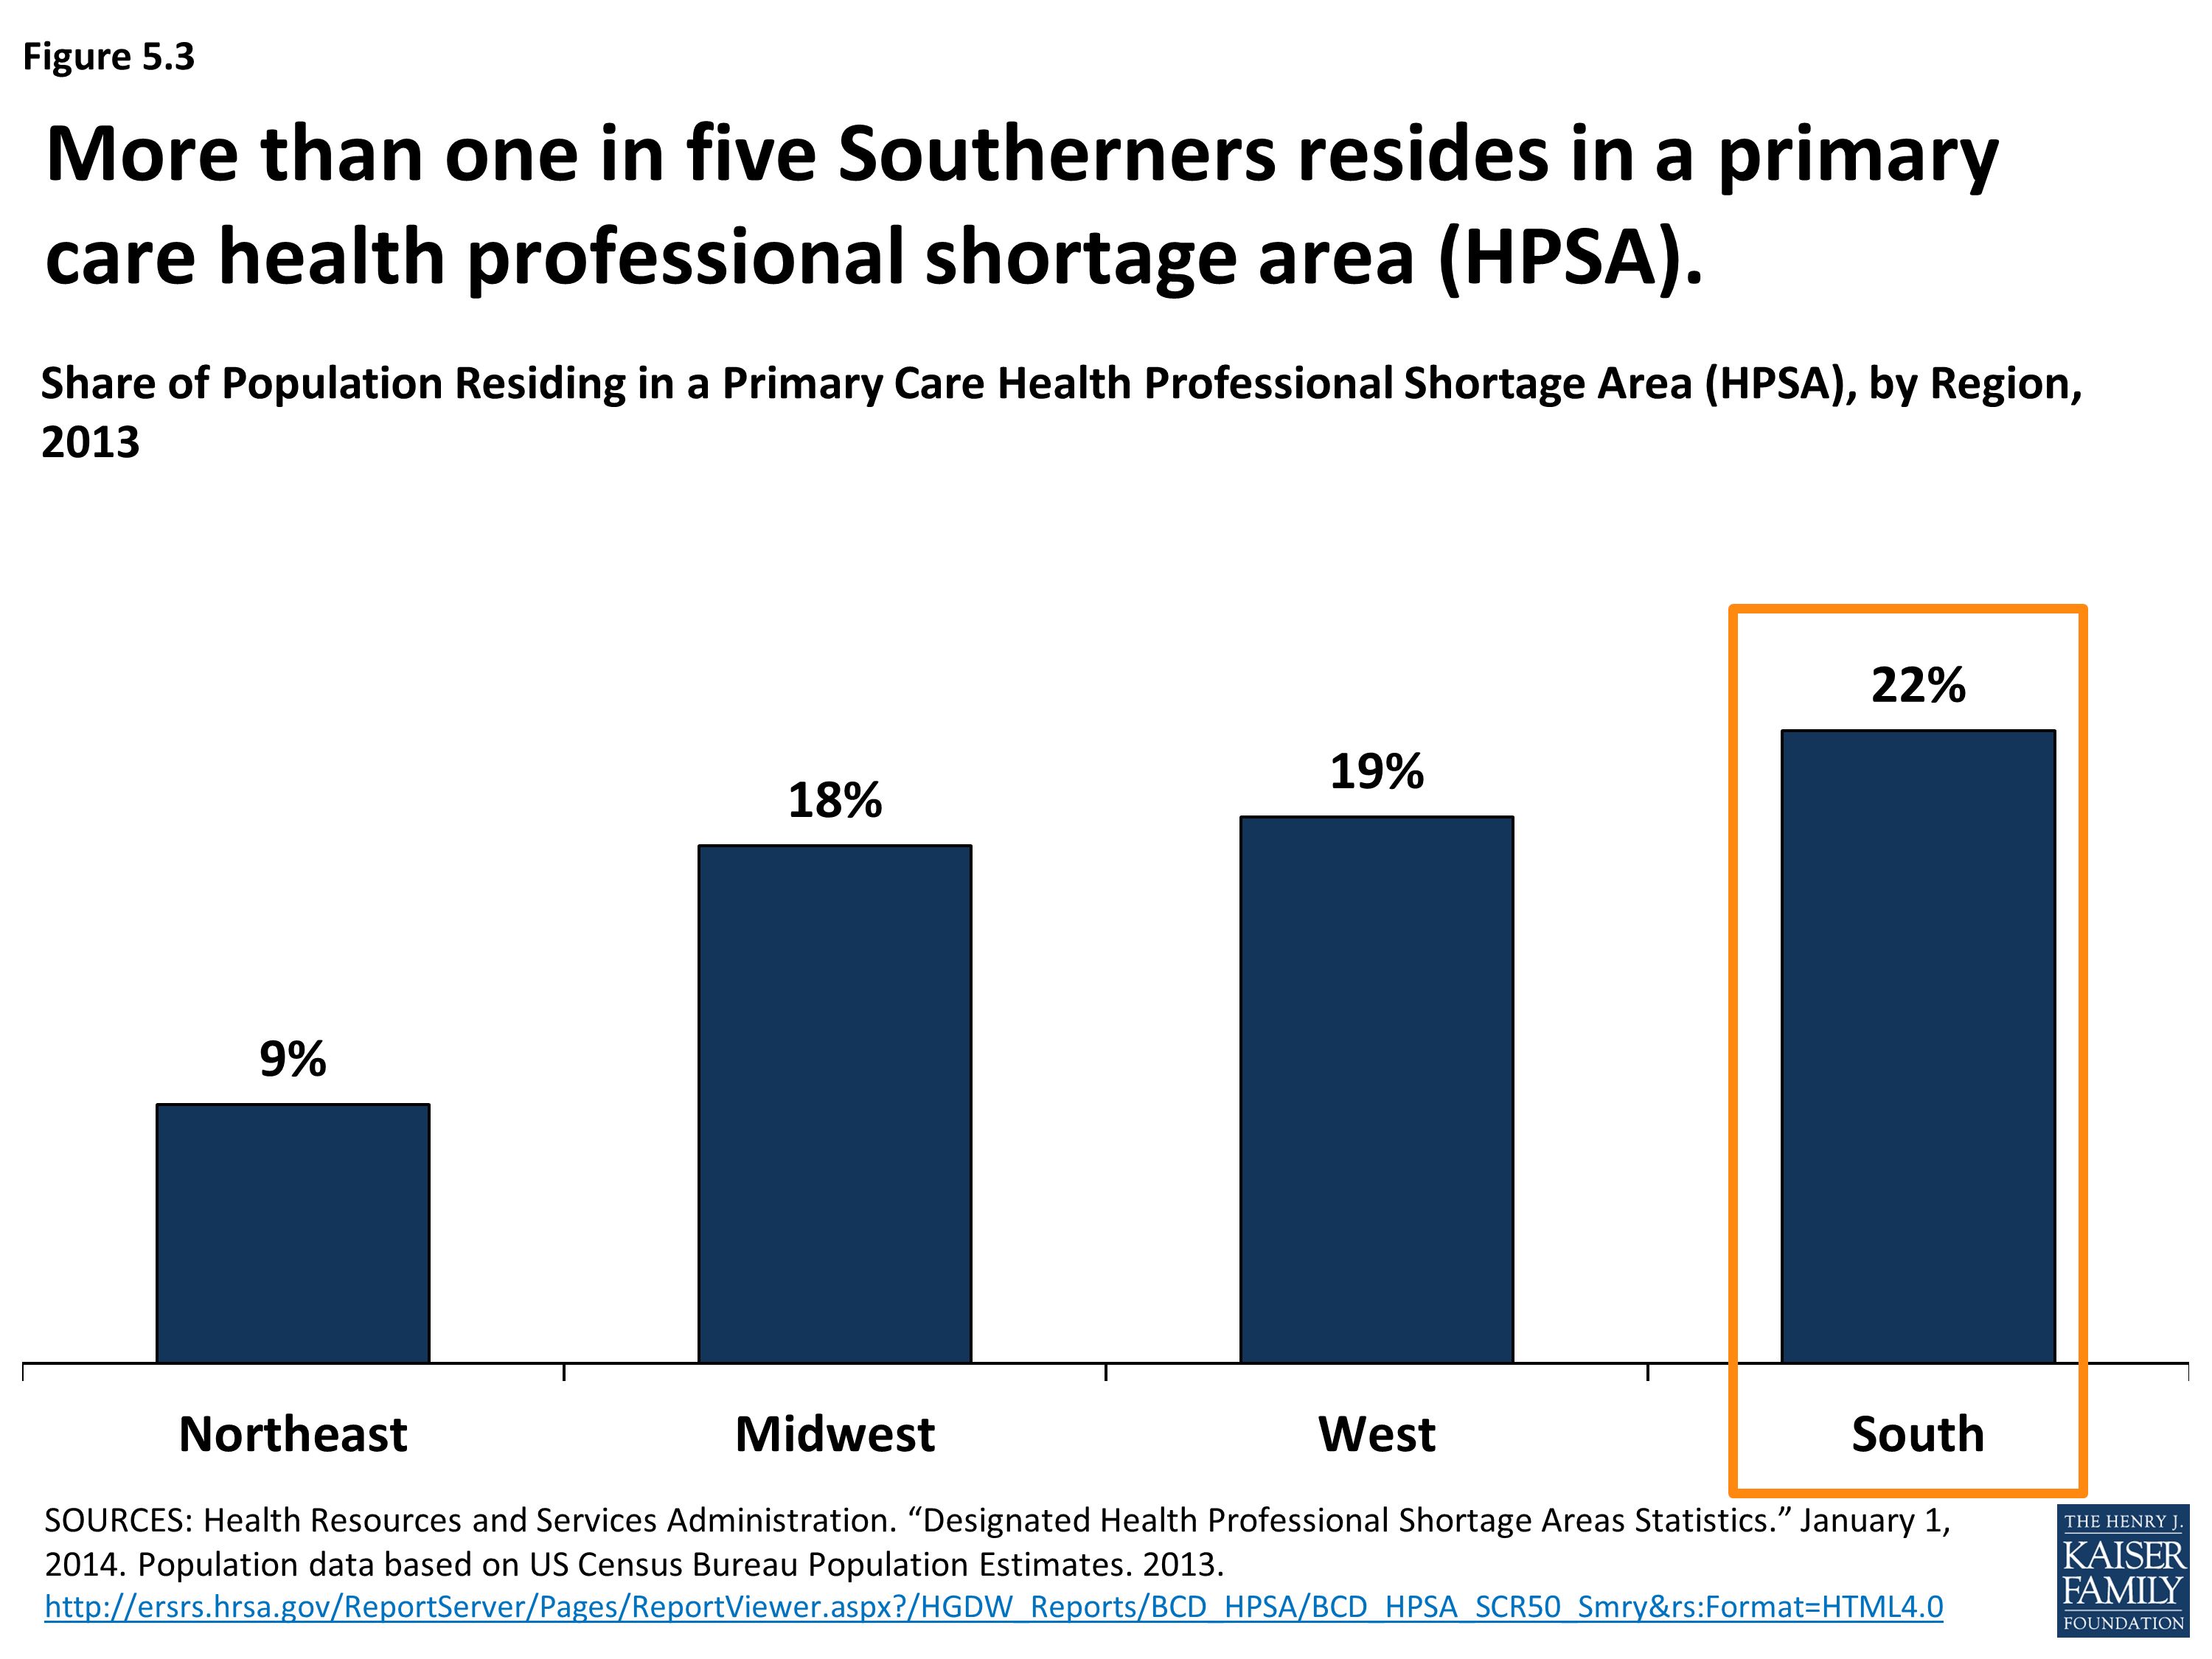 Health Coverage And Care In The South A Chartbook Section 5 Access